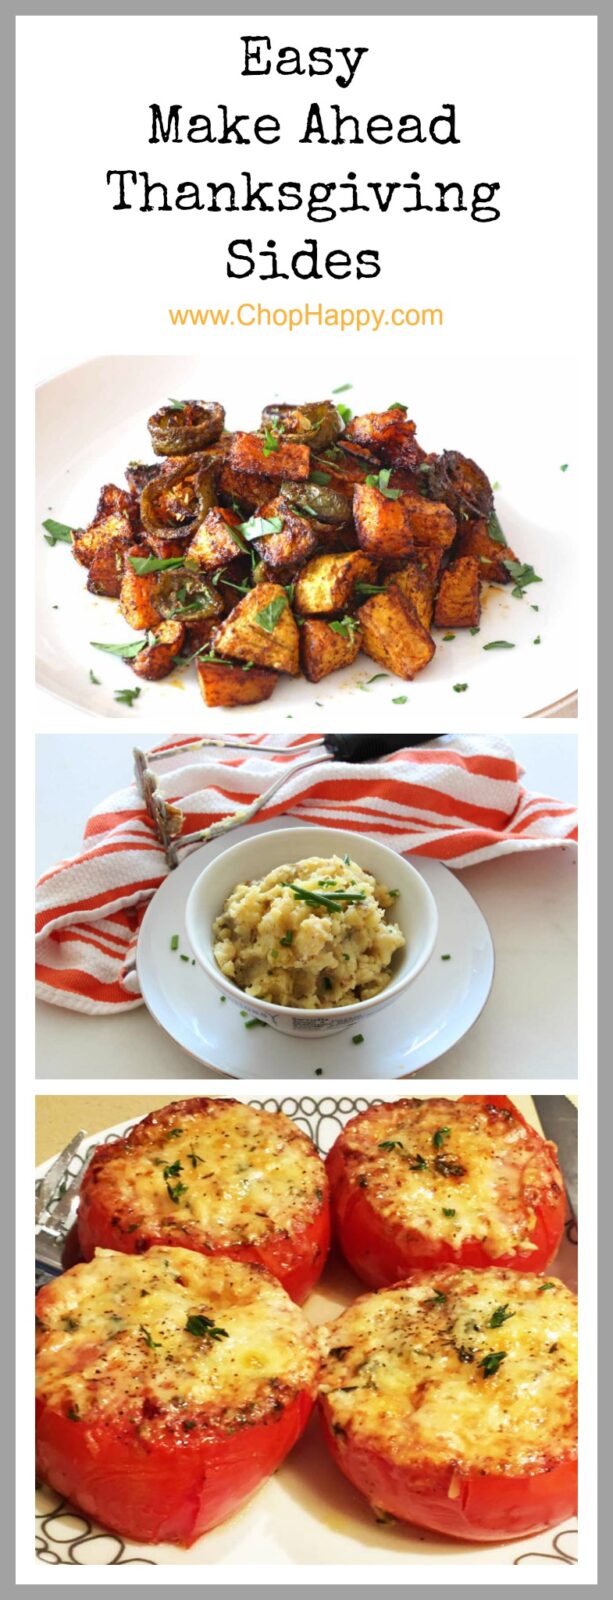 Easy Make Ahead Thanksgiving Side Recipes that are comfort food fantastic. Grab your potatoes, cheese, and family for simple side recipes. www.ChopHappy.com